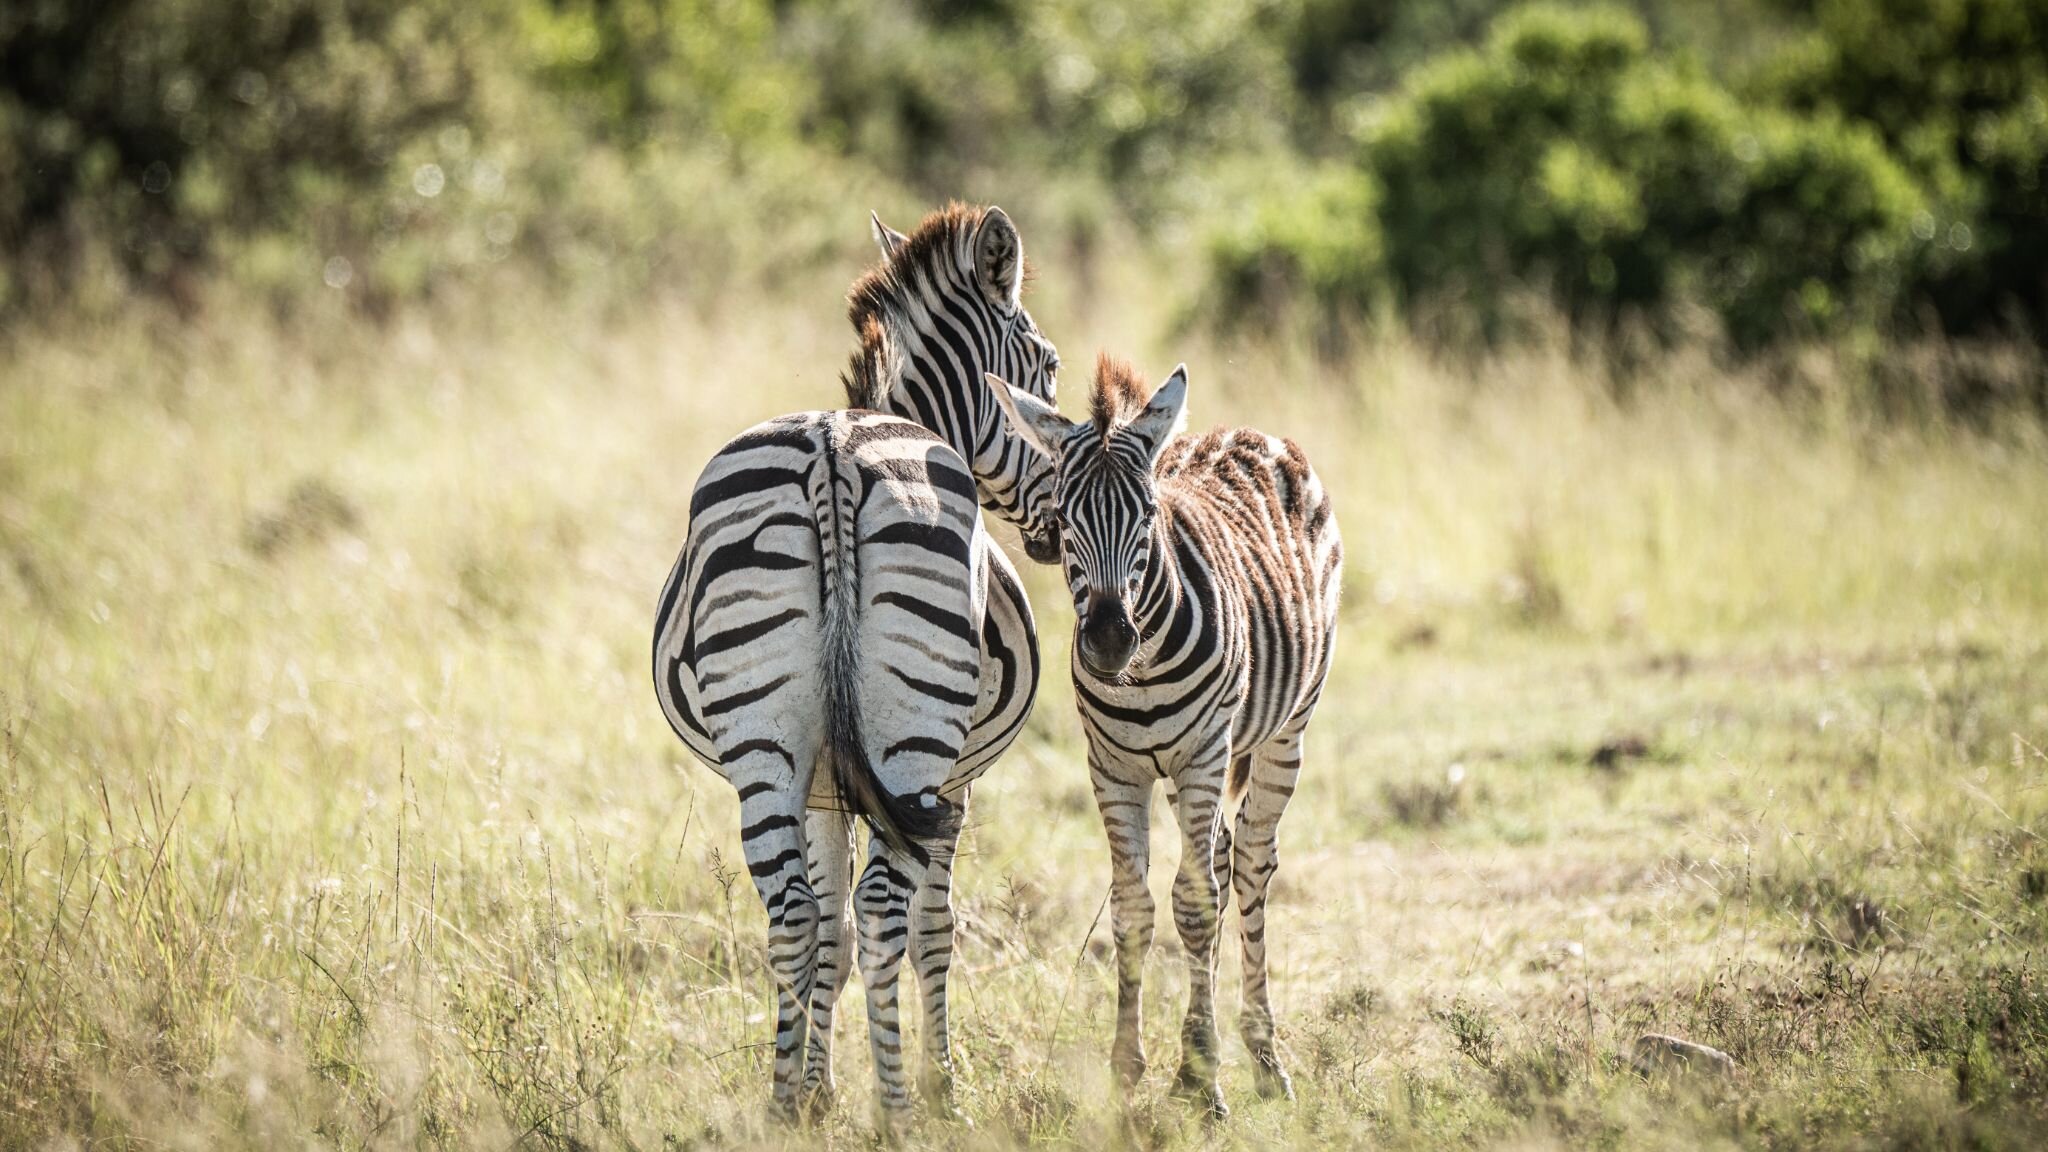 WYLD Mother &amp; Child of the Week: Who's your Mama?

When a baby zebra, or foal, is born, it's a pretty wobbly little thing. They're usually up on their feet within an hour, and it's mom who plays a big role in teaching them the ropes of zebra life